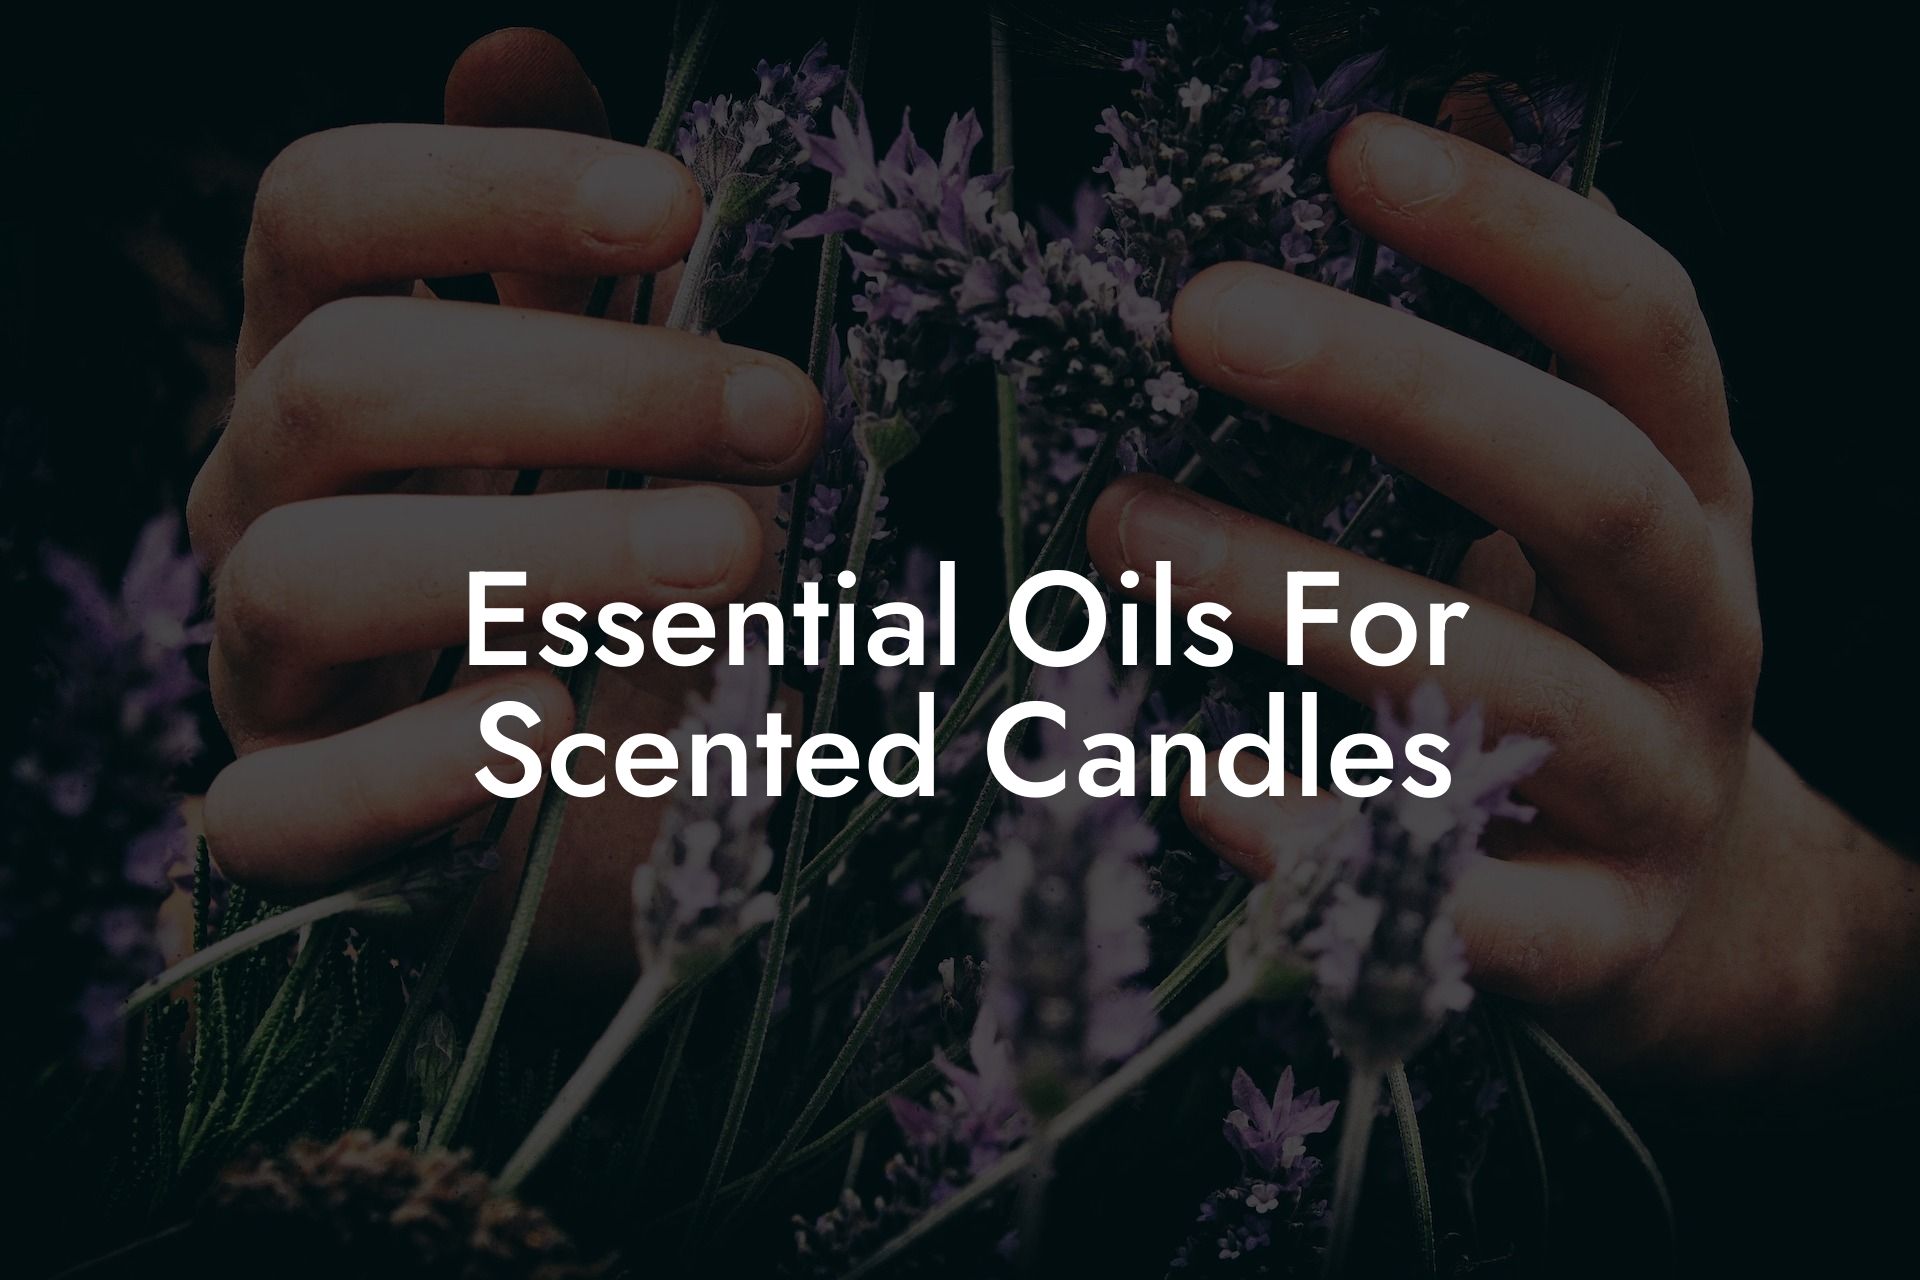 Essential Oils For Scented Candles